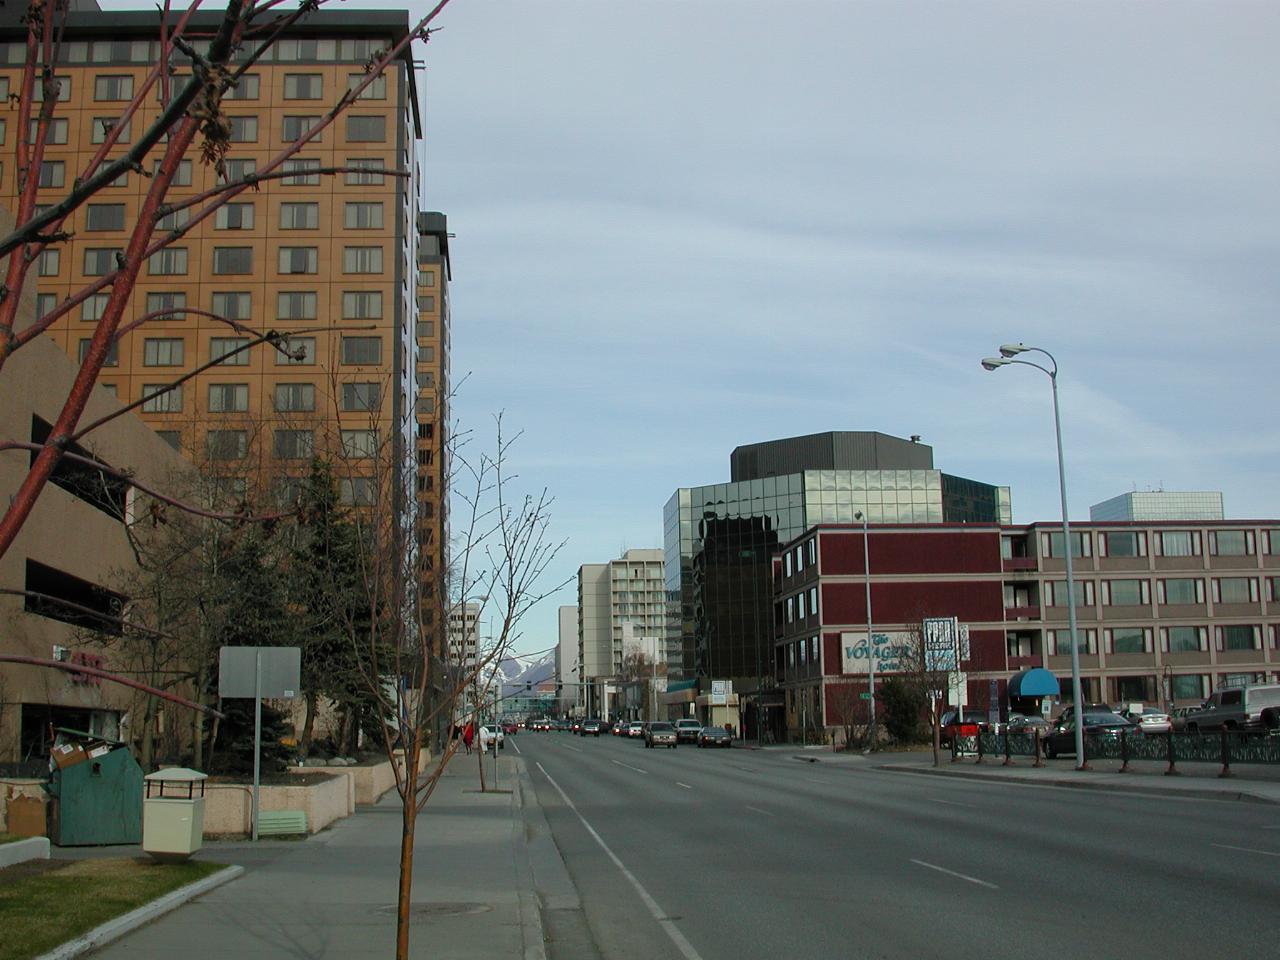 Looking east along West 5th Avenue